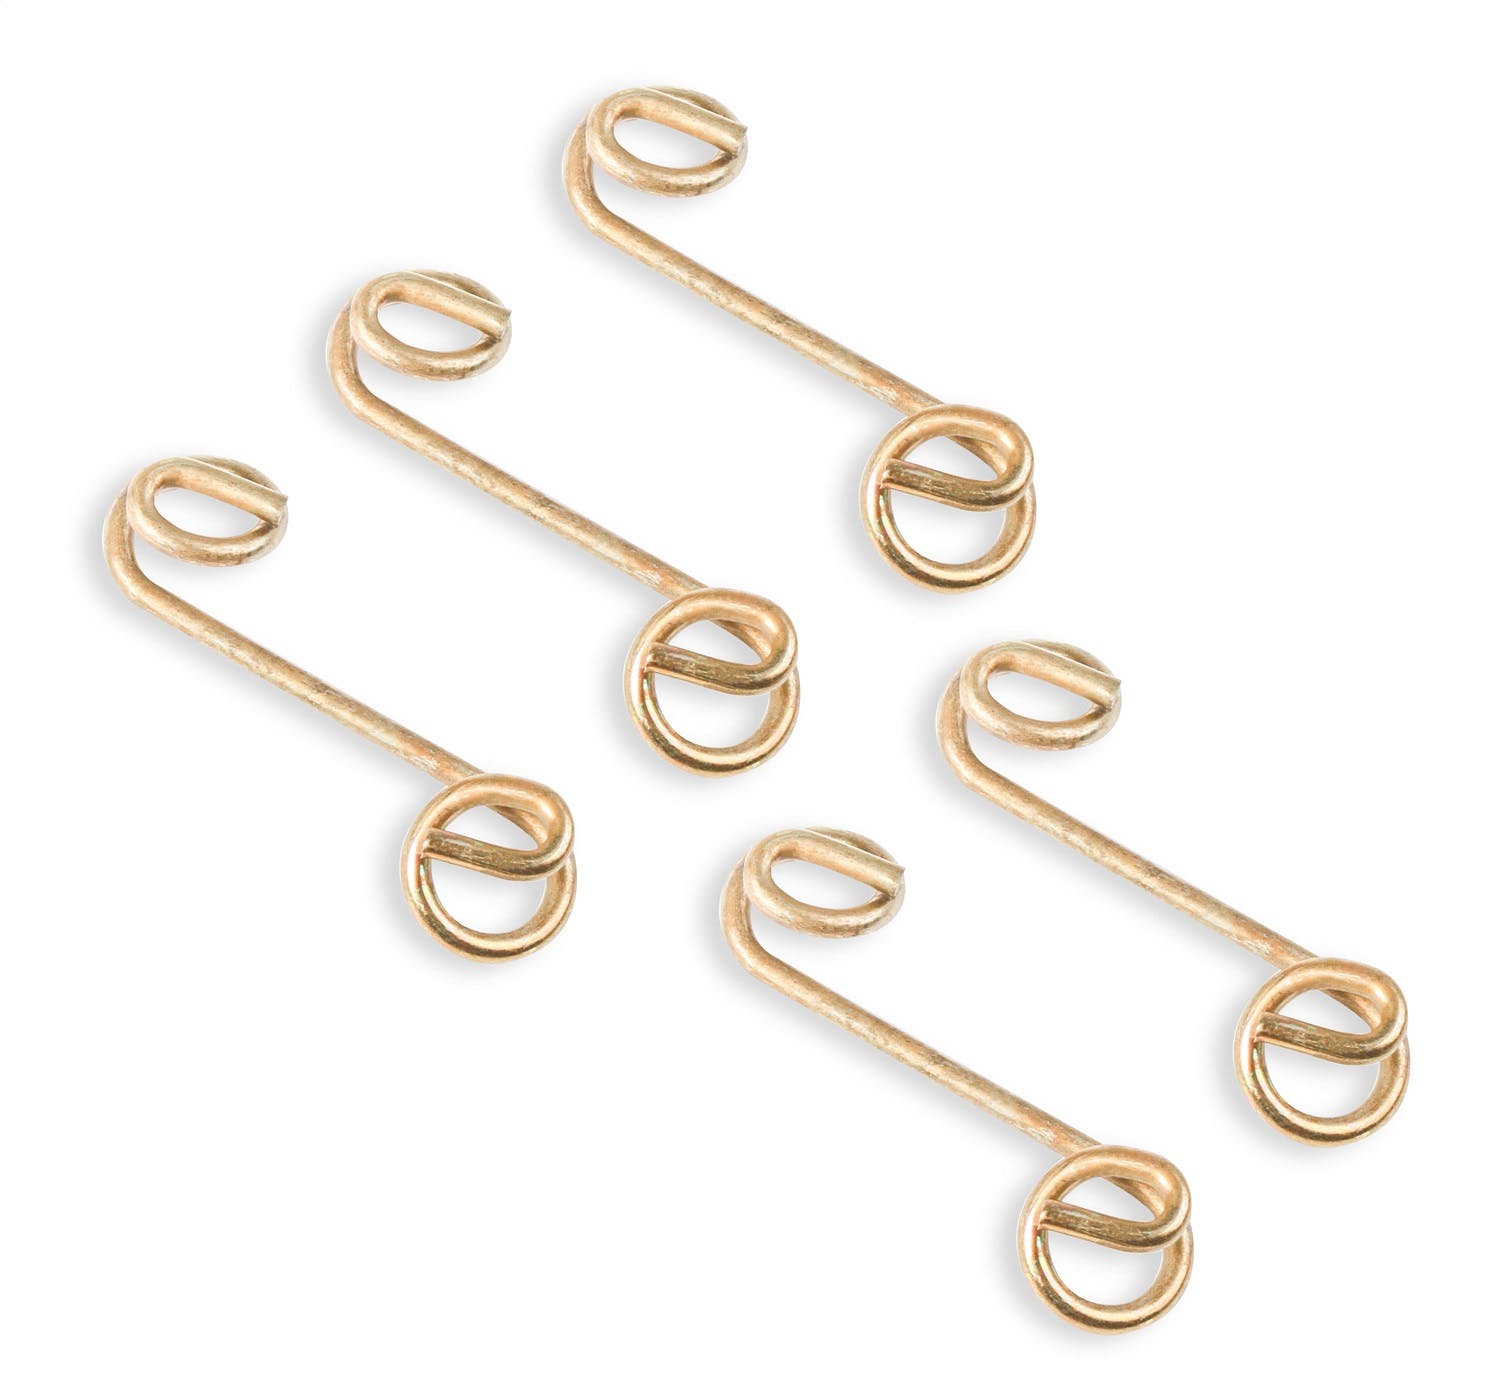 Earl's Performance Plumbing PANS6375-ERL 1.375 IN. SPRING .375 GRIP - GOLD (5)